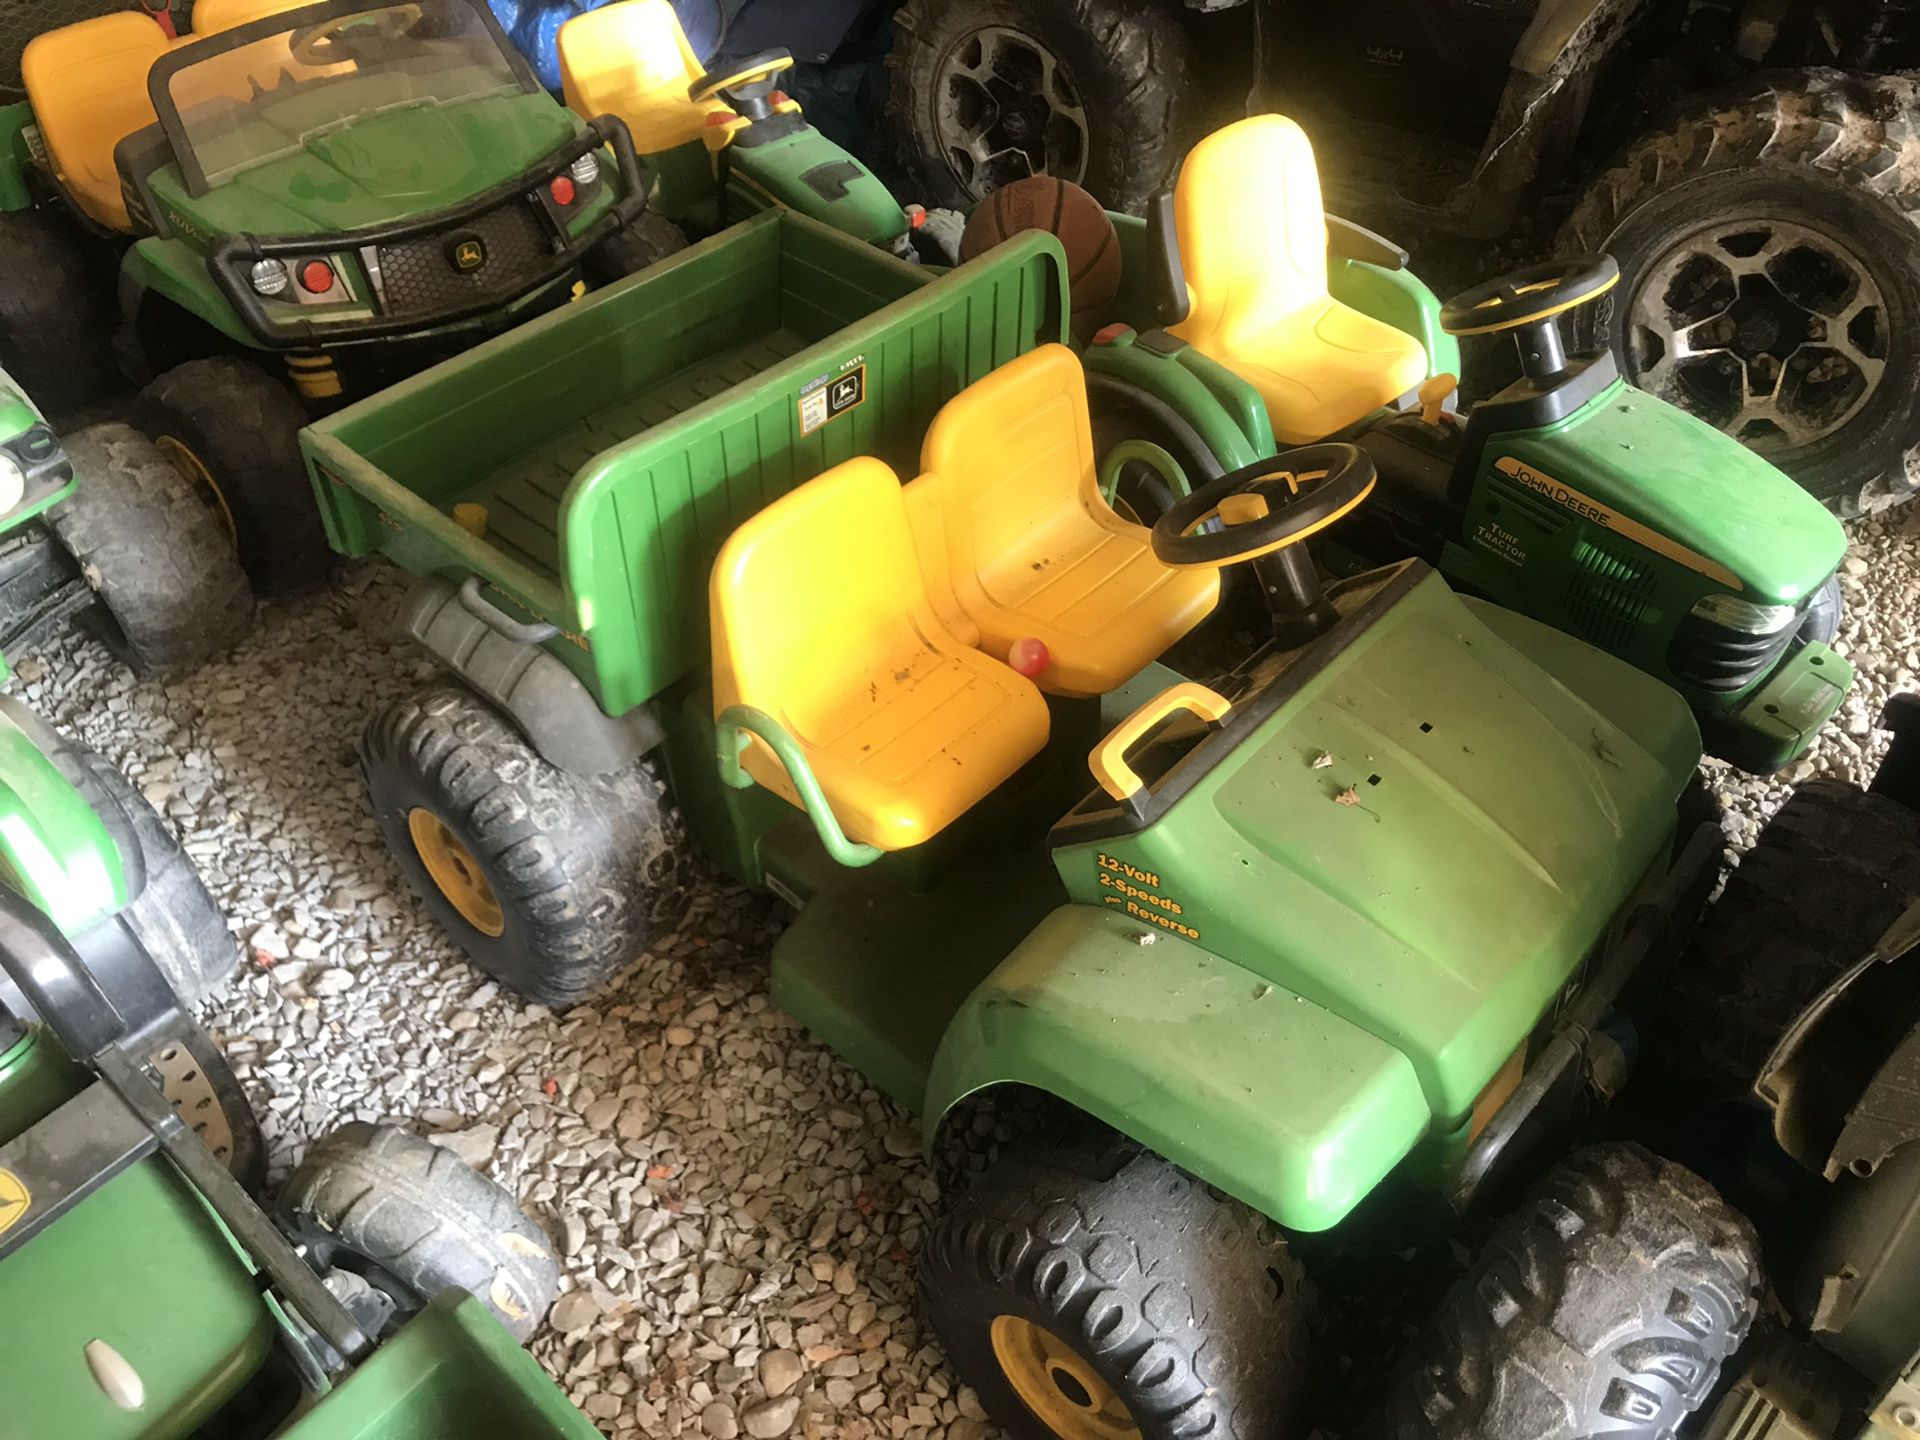 Several John Deere power wheels and jeep